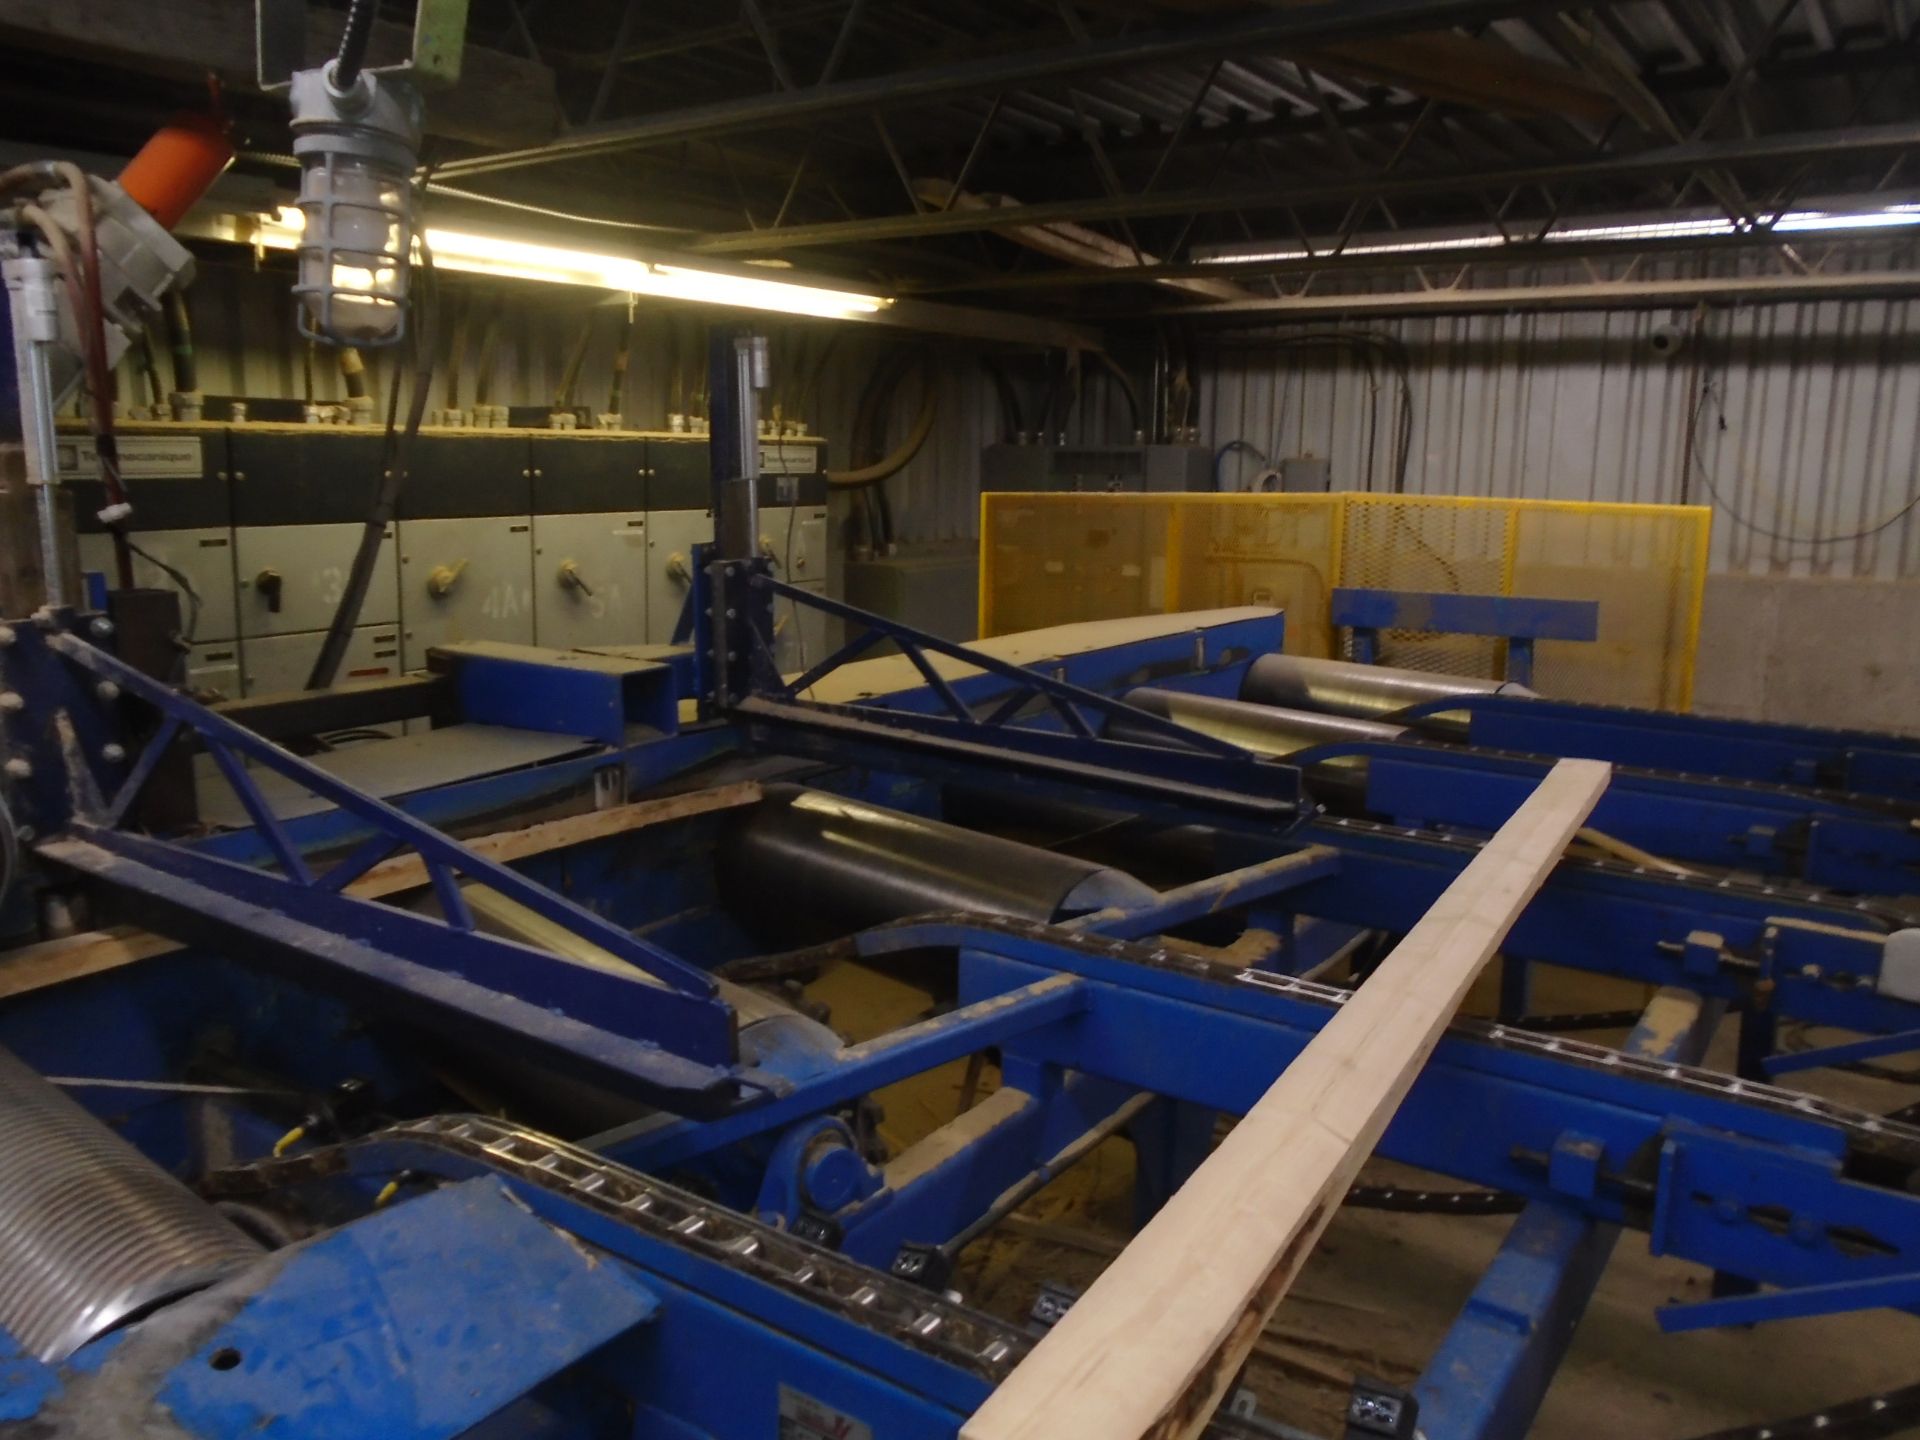 CUSTOM LUMBER INFEED SYSTEM CONSISTING OF (1) 32'L X 10'W 4 CHAIN POWERED INFEED CONVEYOR, (1) 2